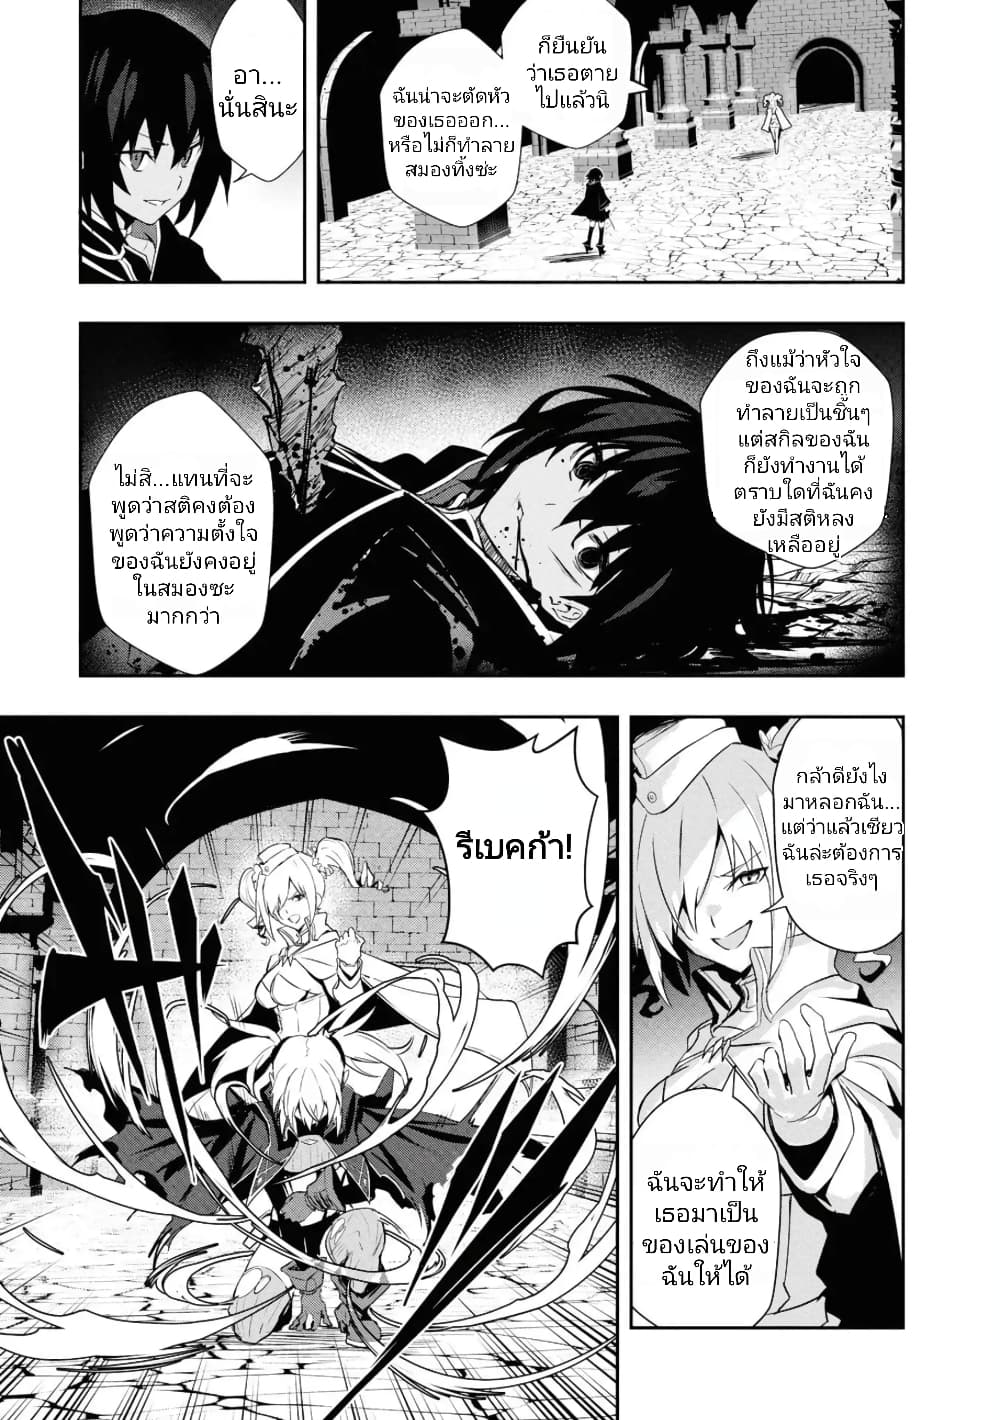 Witch Guild Fantasia 10 (17)